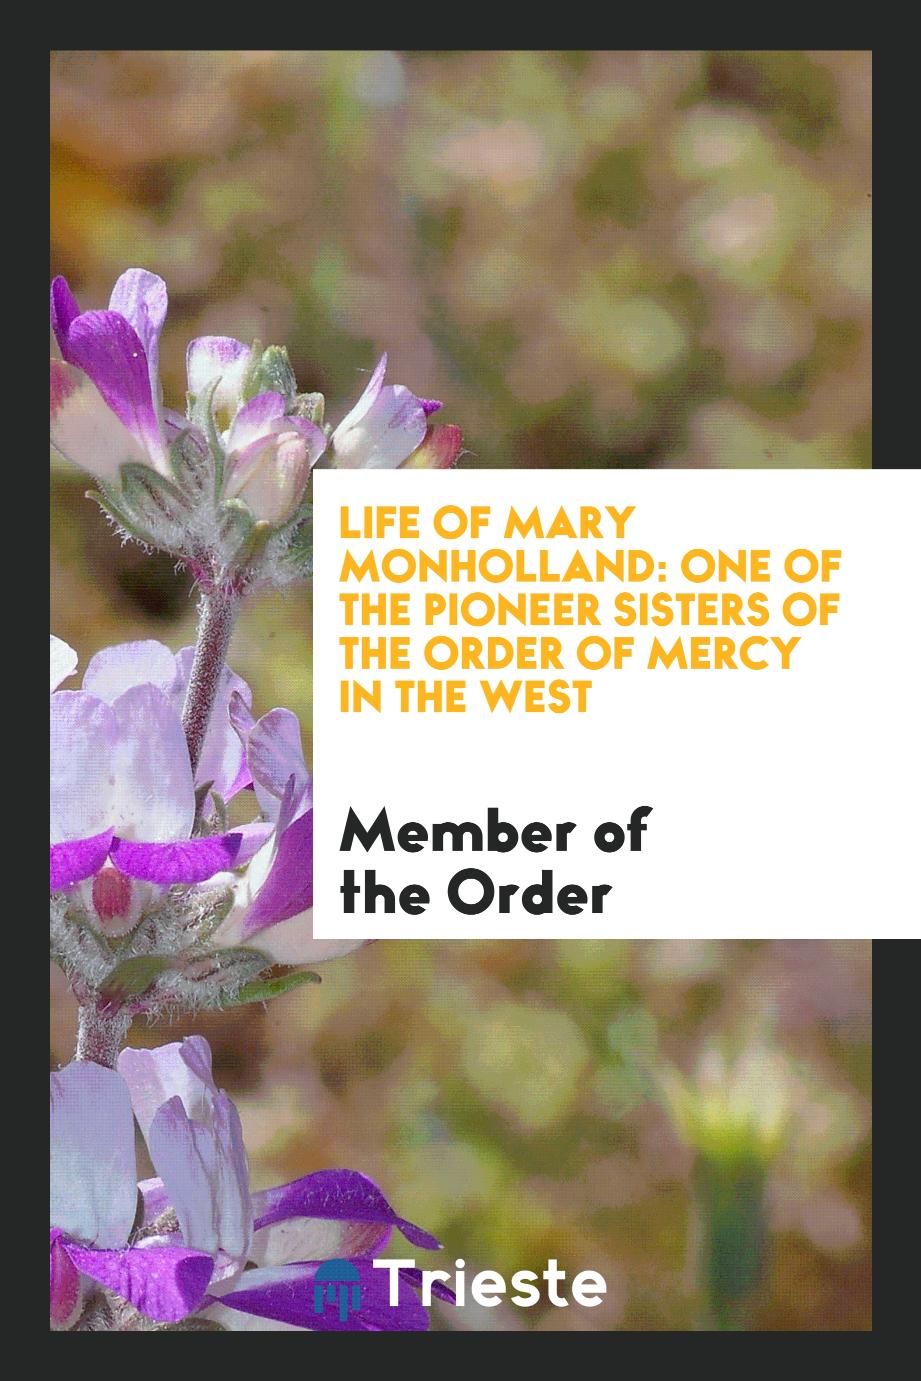 Life of Mary Monholland: one of the pioneer sisters of the Order of Mercy in the West